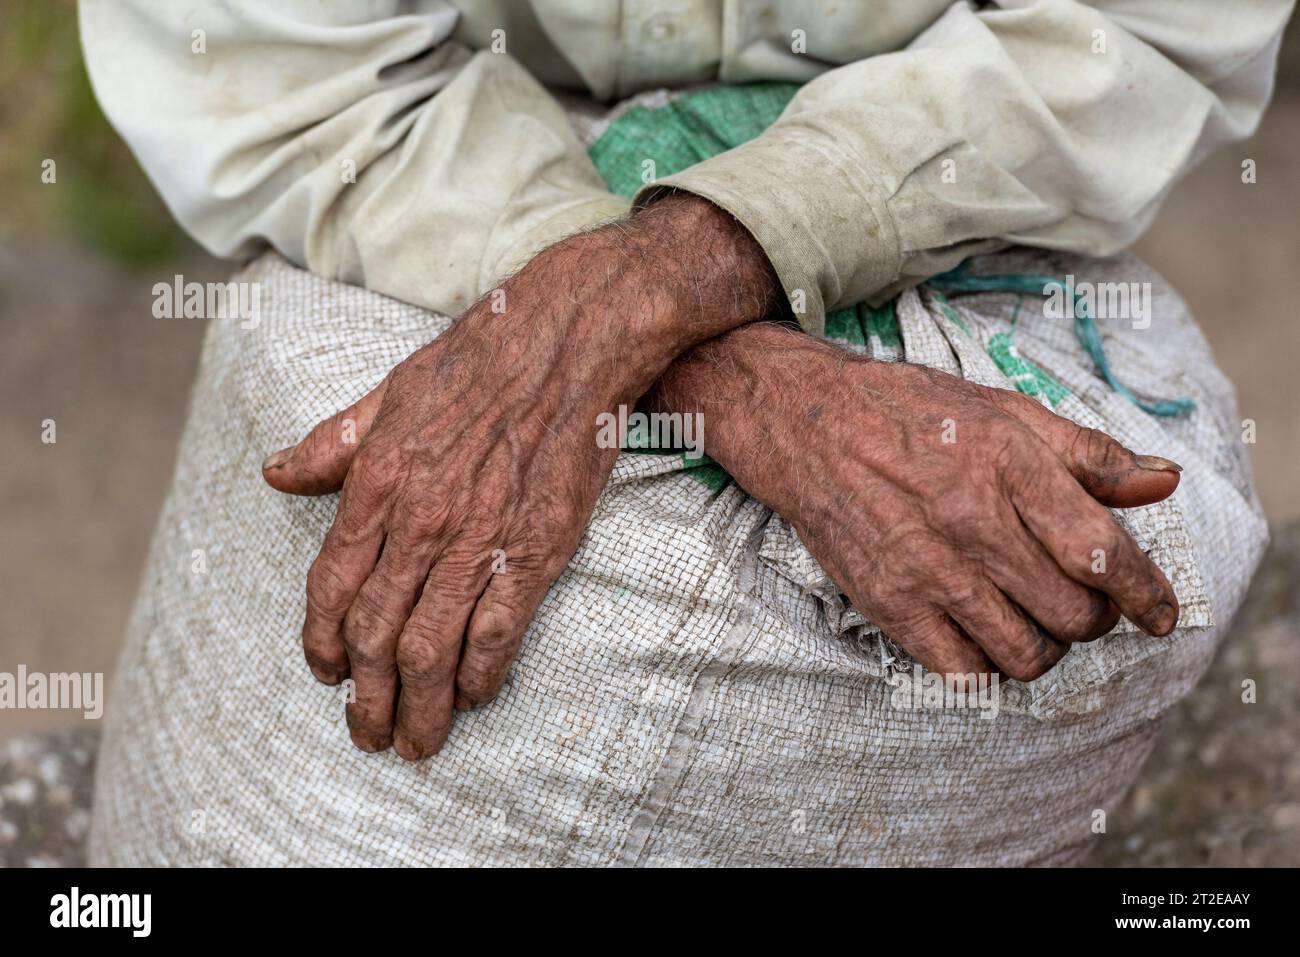 Hands of a coffee picker in Colombia, Manizales, Caldas, South America Stock Photo